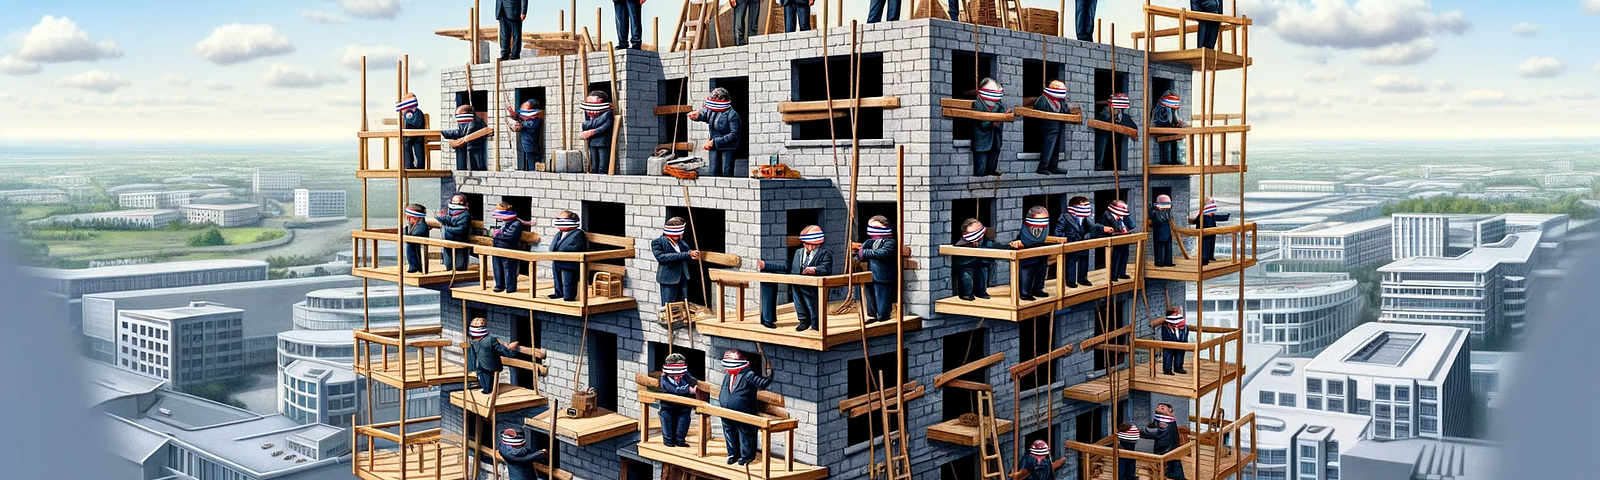 ChatGPT & DALL-E generated panoramic image depicting blindfolded builders working on a construction site, symbolizing misguided cooperation and lack of coordination. The scene portrays an unstable and nonsensical structure set against an urban landscape.